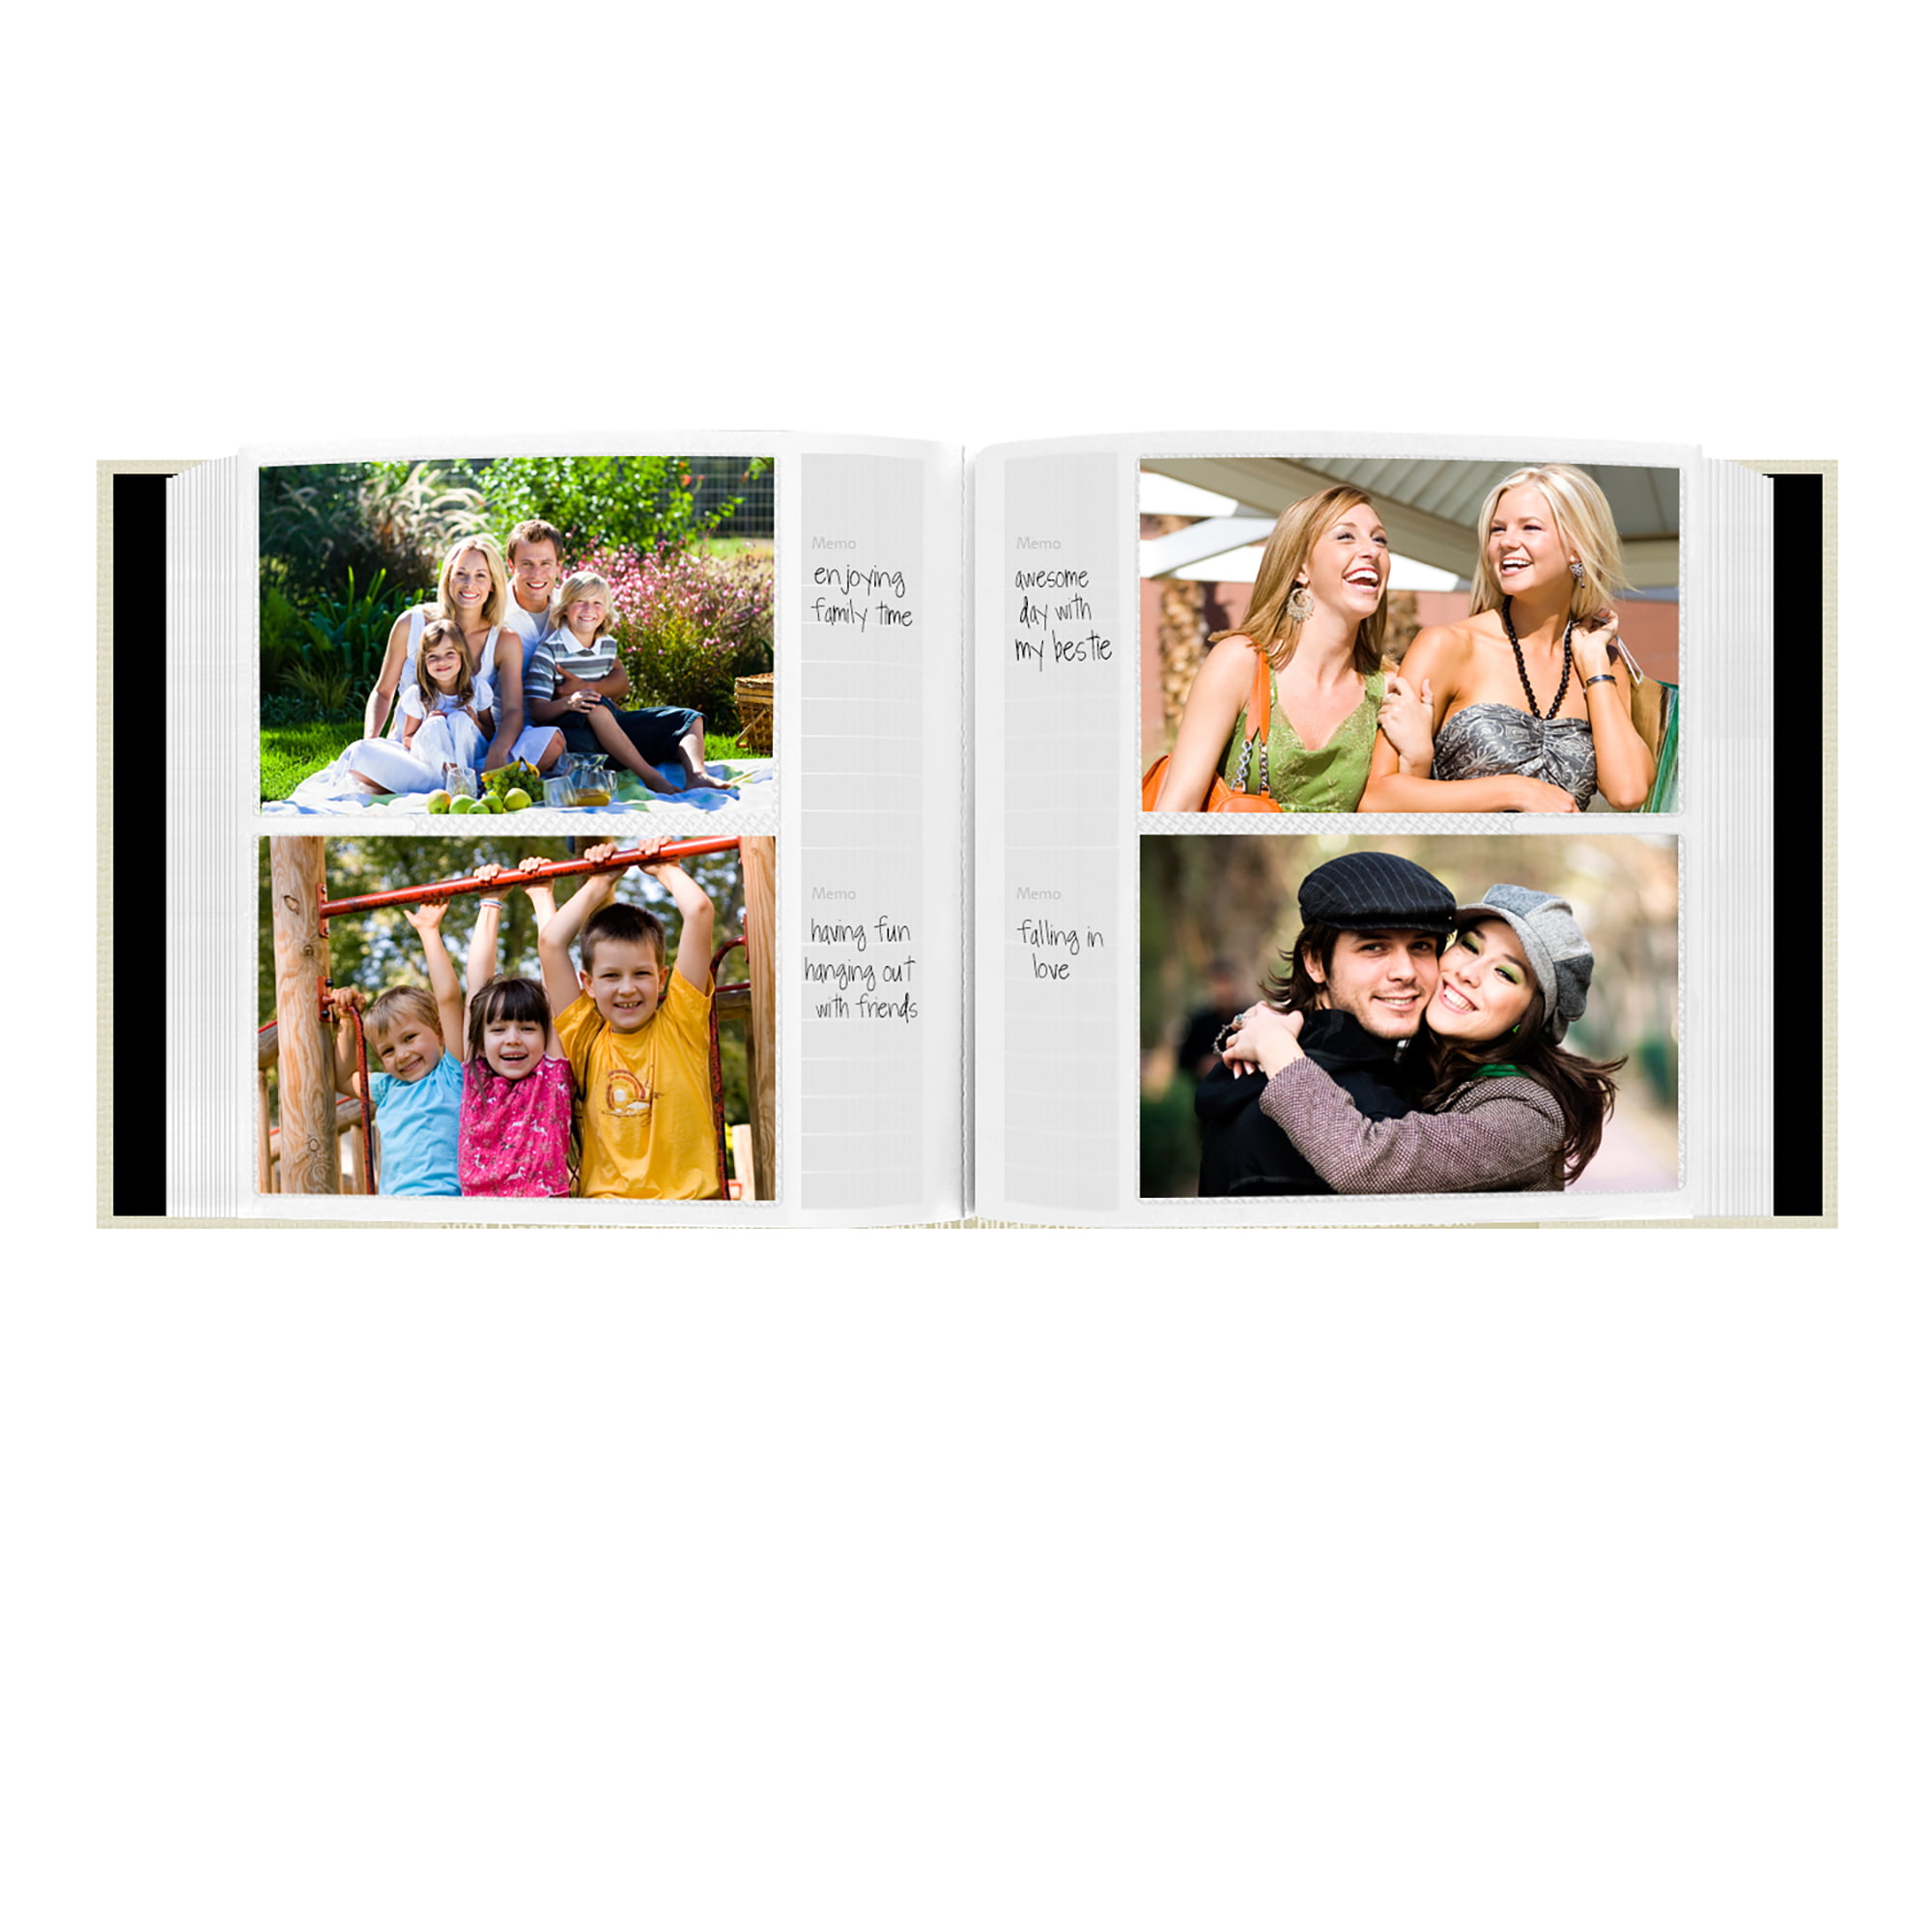 Leather 6-inch Family Photo Album 200 Pp Pockets Photo Albums 4x6